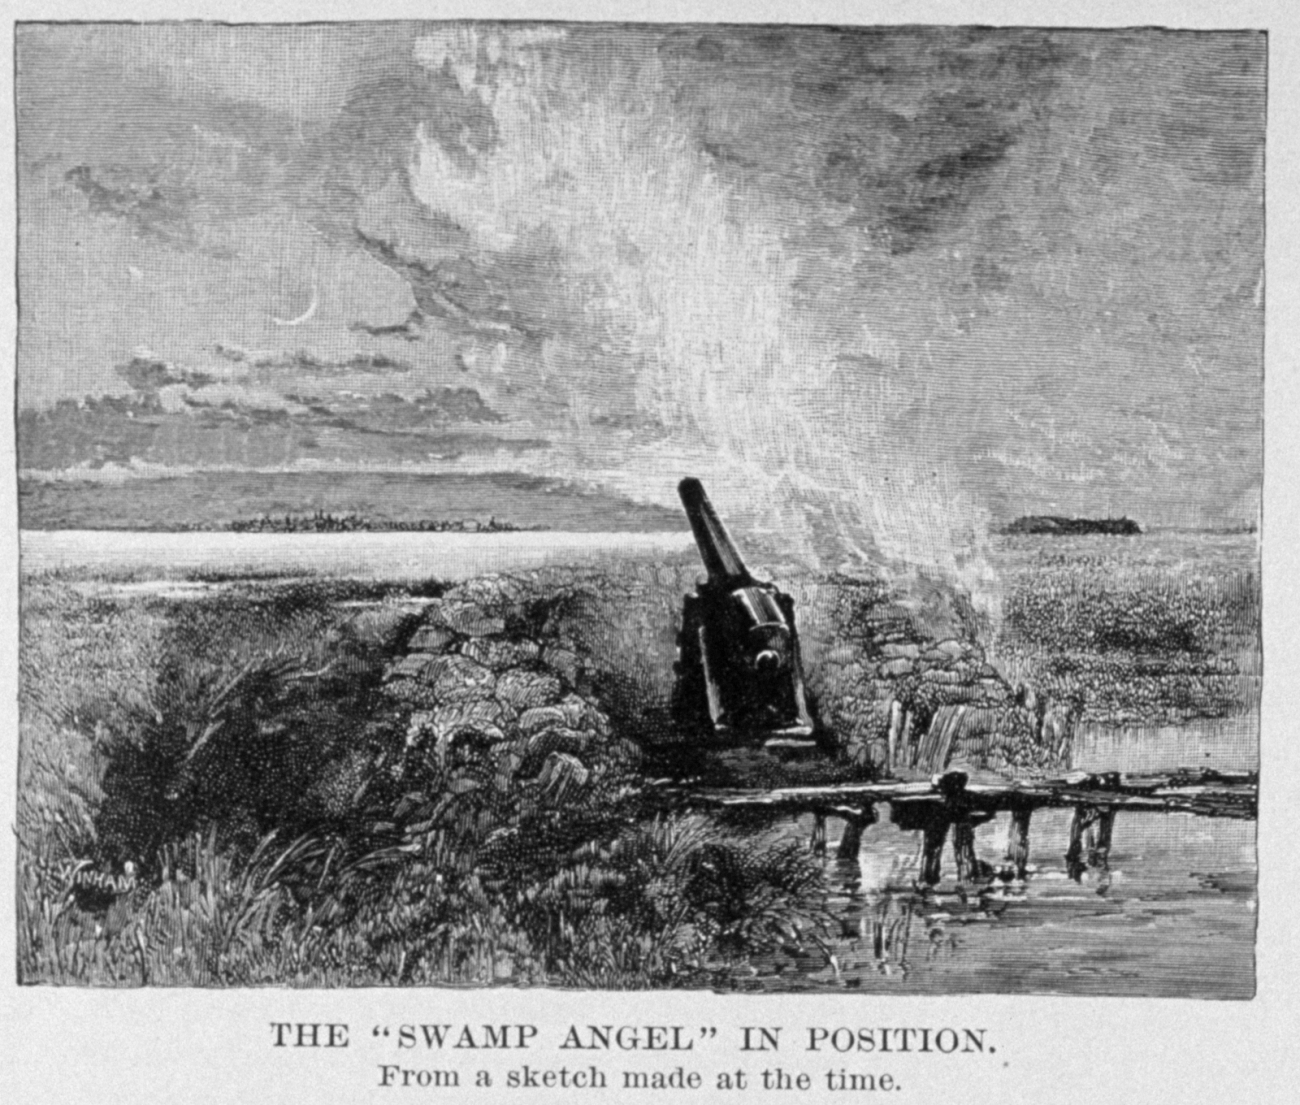 The Swamp Angel in position and ready to fire on Charleston